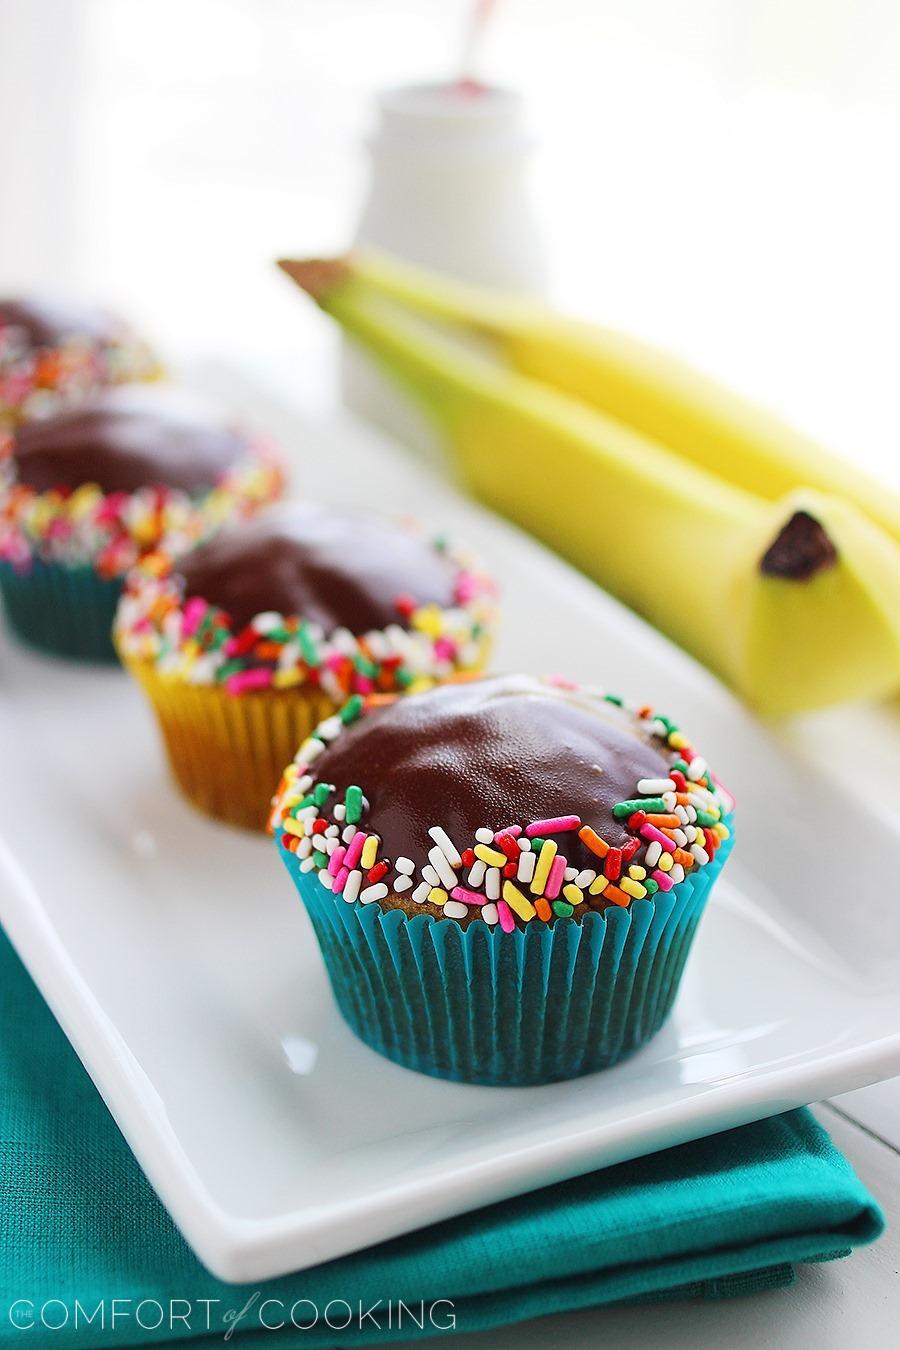 Chocolate Glazed Banana Bread Muffins – Bake up a batch of cheerful, chocolaty banana bread muffins... sure to make any morning a bit brighter! | thecomfortofcooking.com